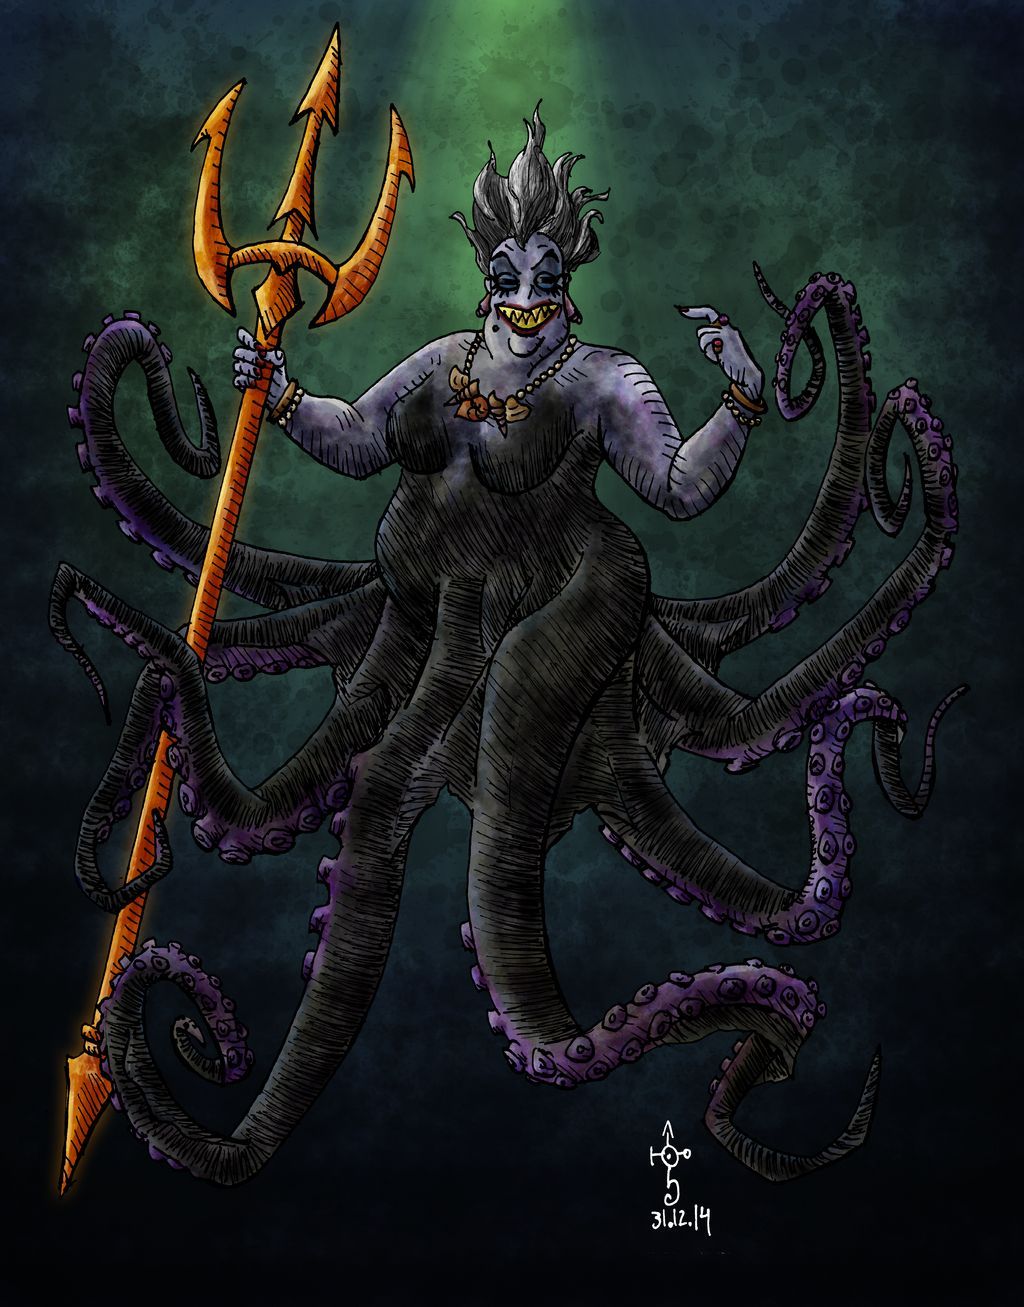 The Little Mermaid 10 Pieces Of Ursula Fan Art That Look Sinister